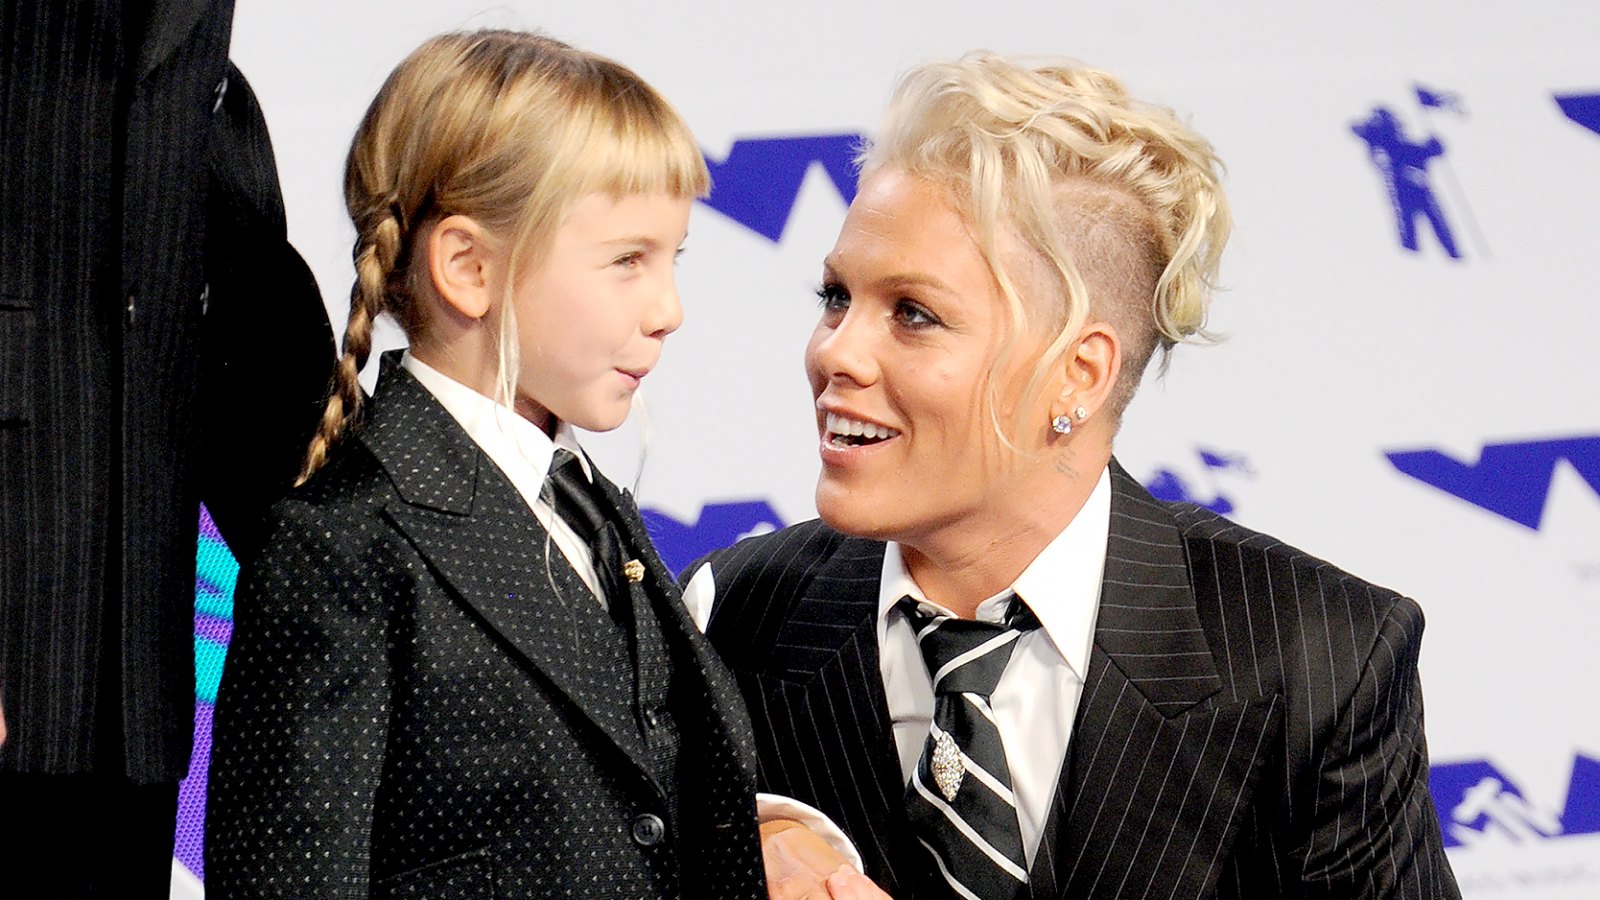 Pink and daughter Willow Sage Hart arrive at the 2017 MTV Video Music Awards at The Forum on August 27, 2017 in Inglewood, California.